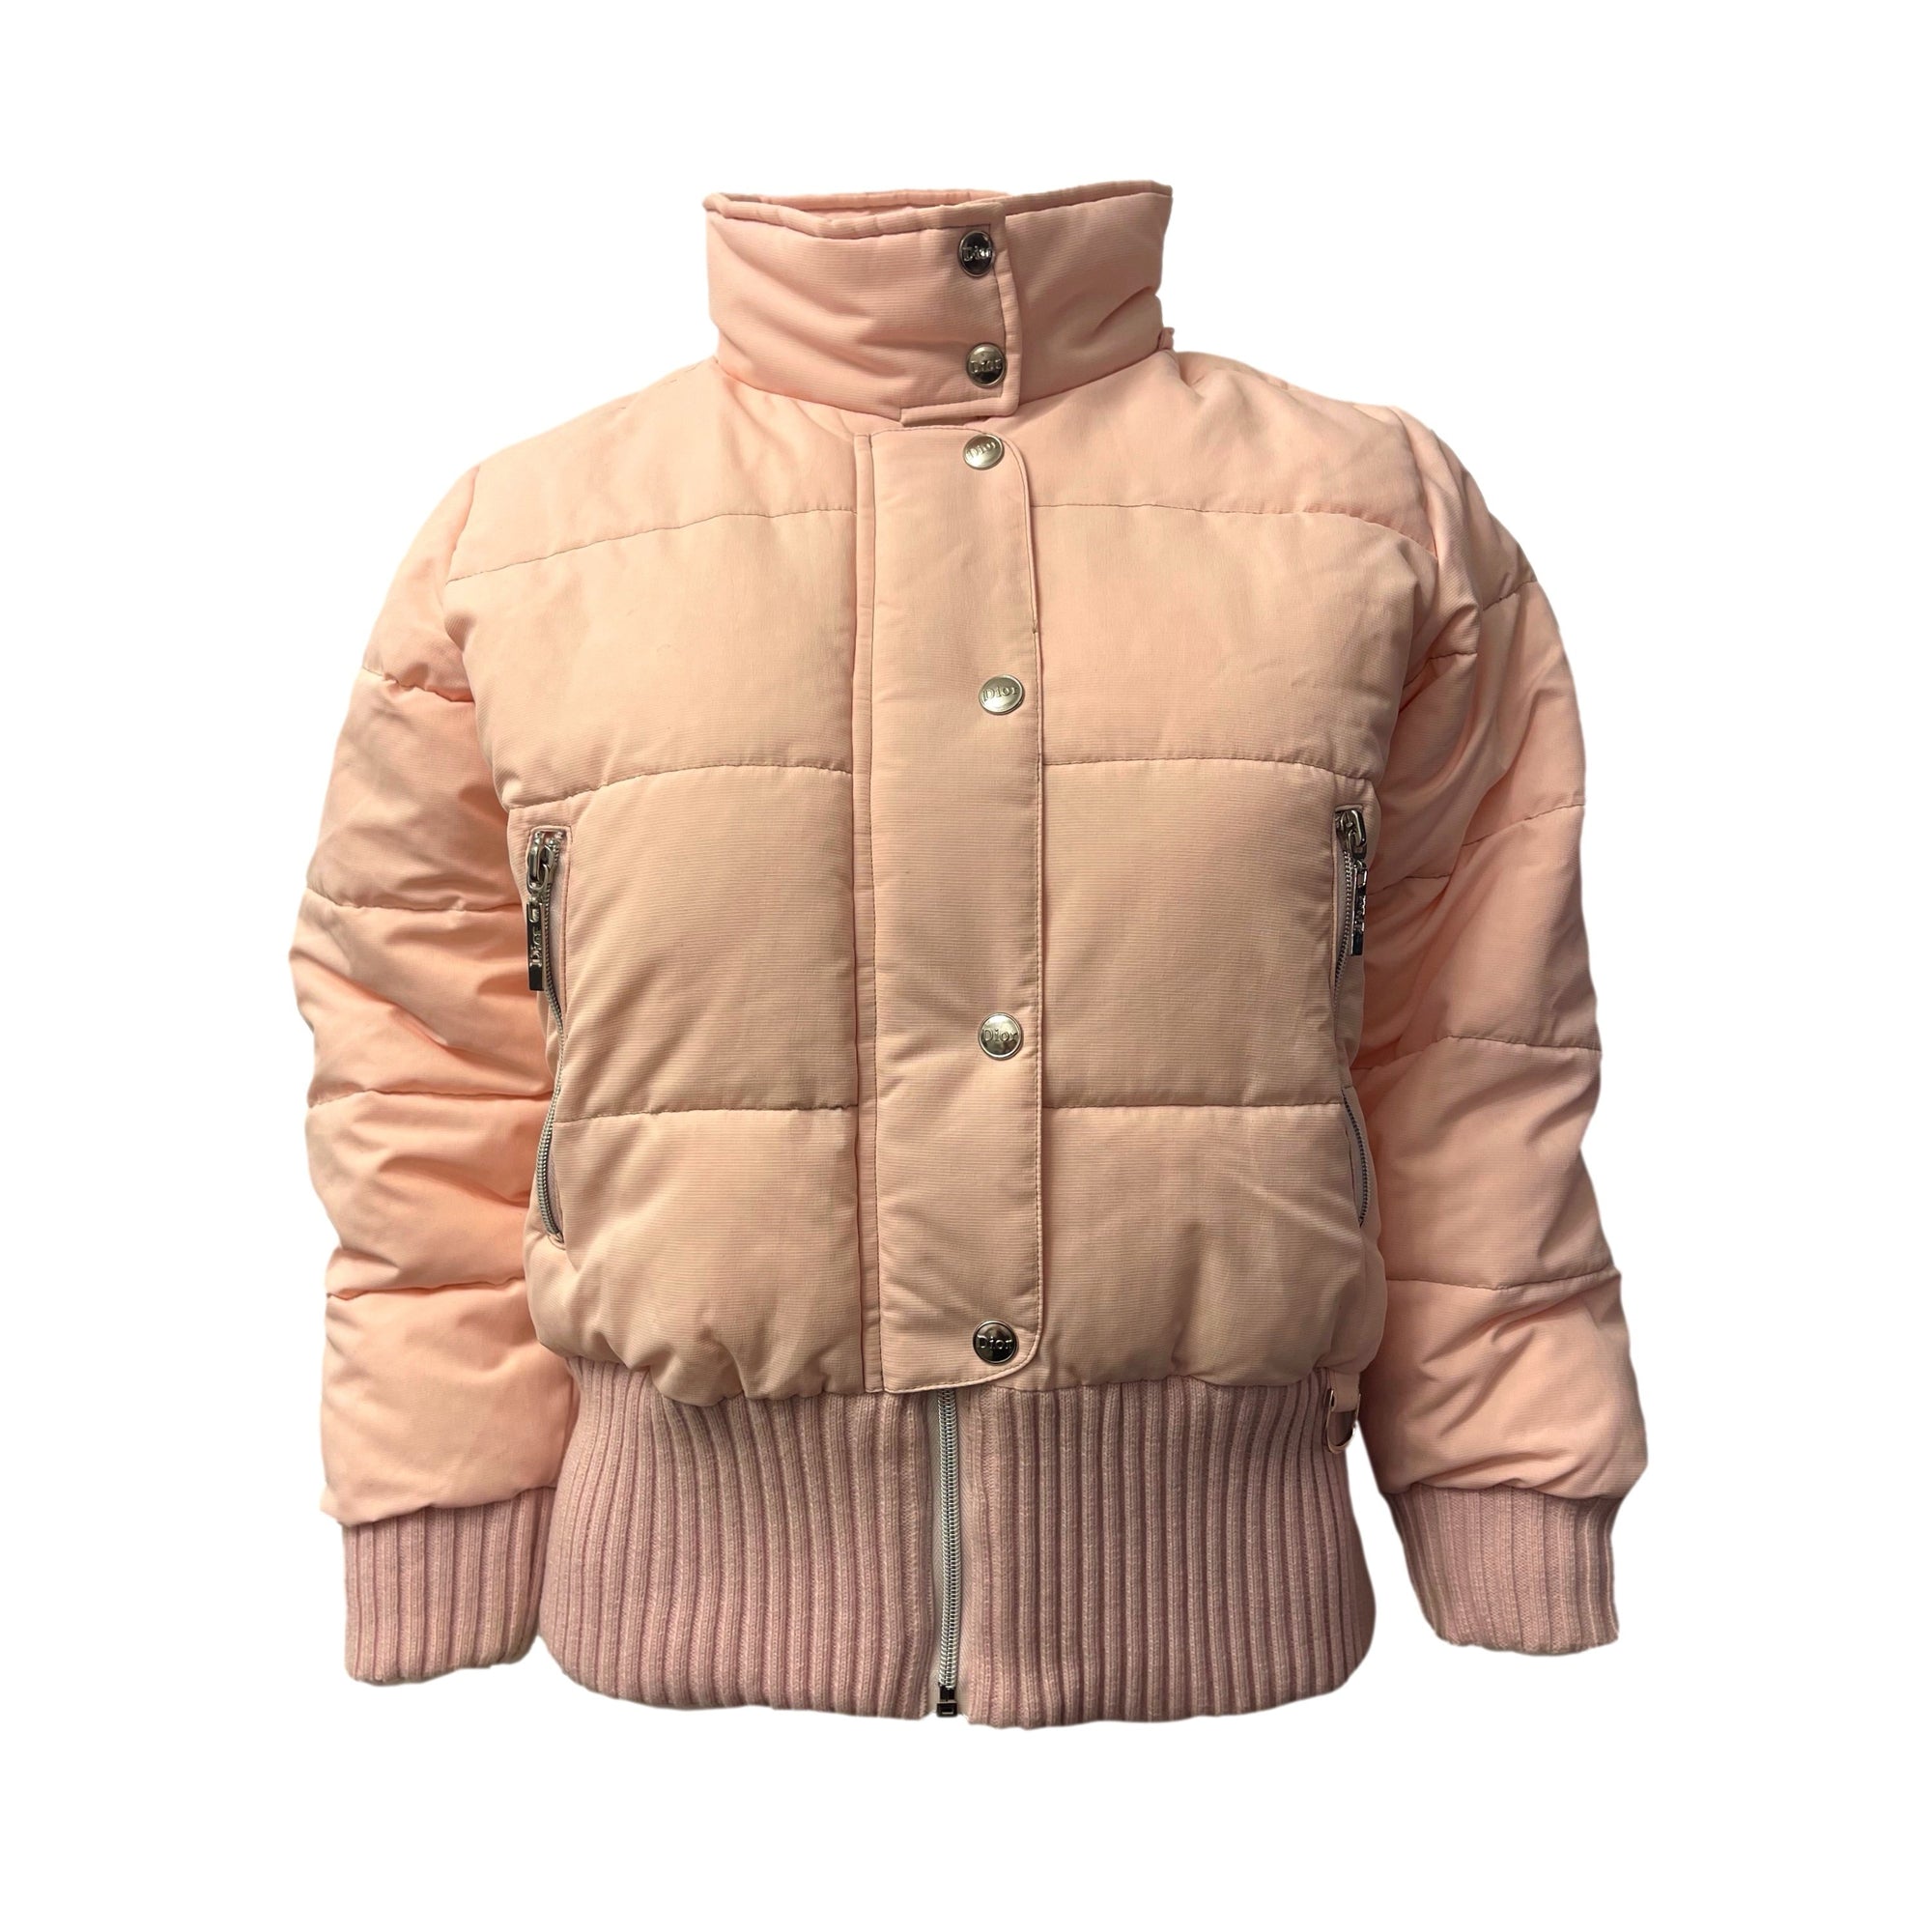 Dior Baby Pink Adiorable Puffer Jacket - Apparel